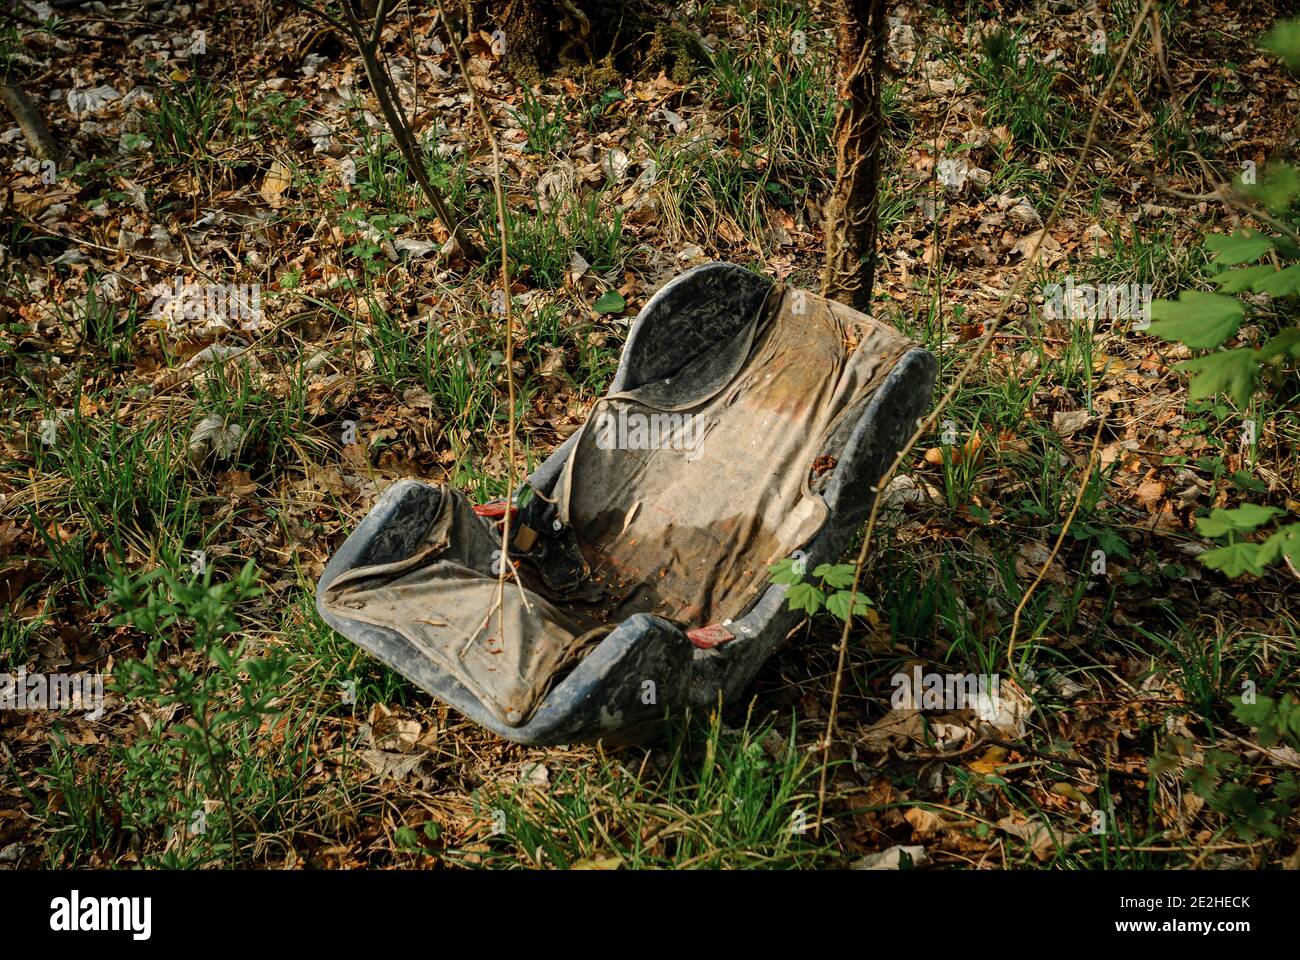 Abandoned baby seat in the forest near Strasbourg, France. A car seat growing old alone in a wood near Strasbourg France. Stock Photo